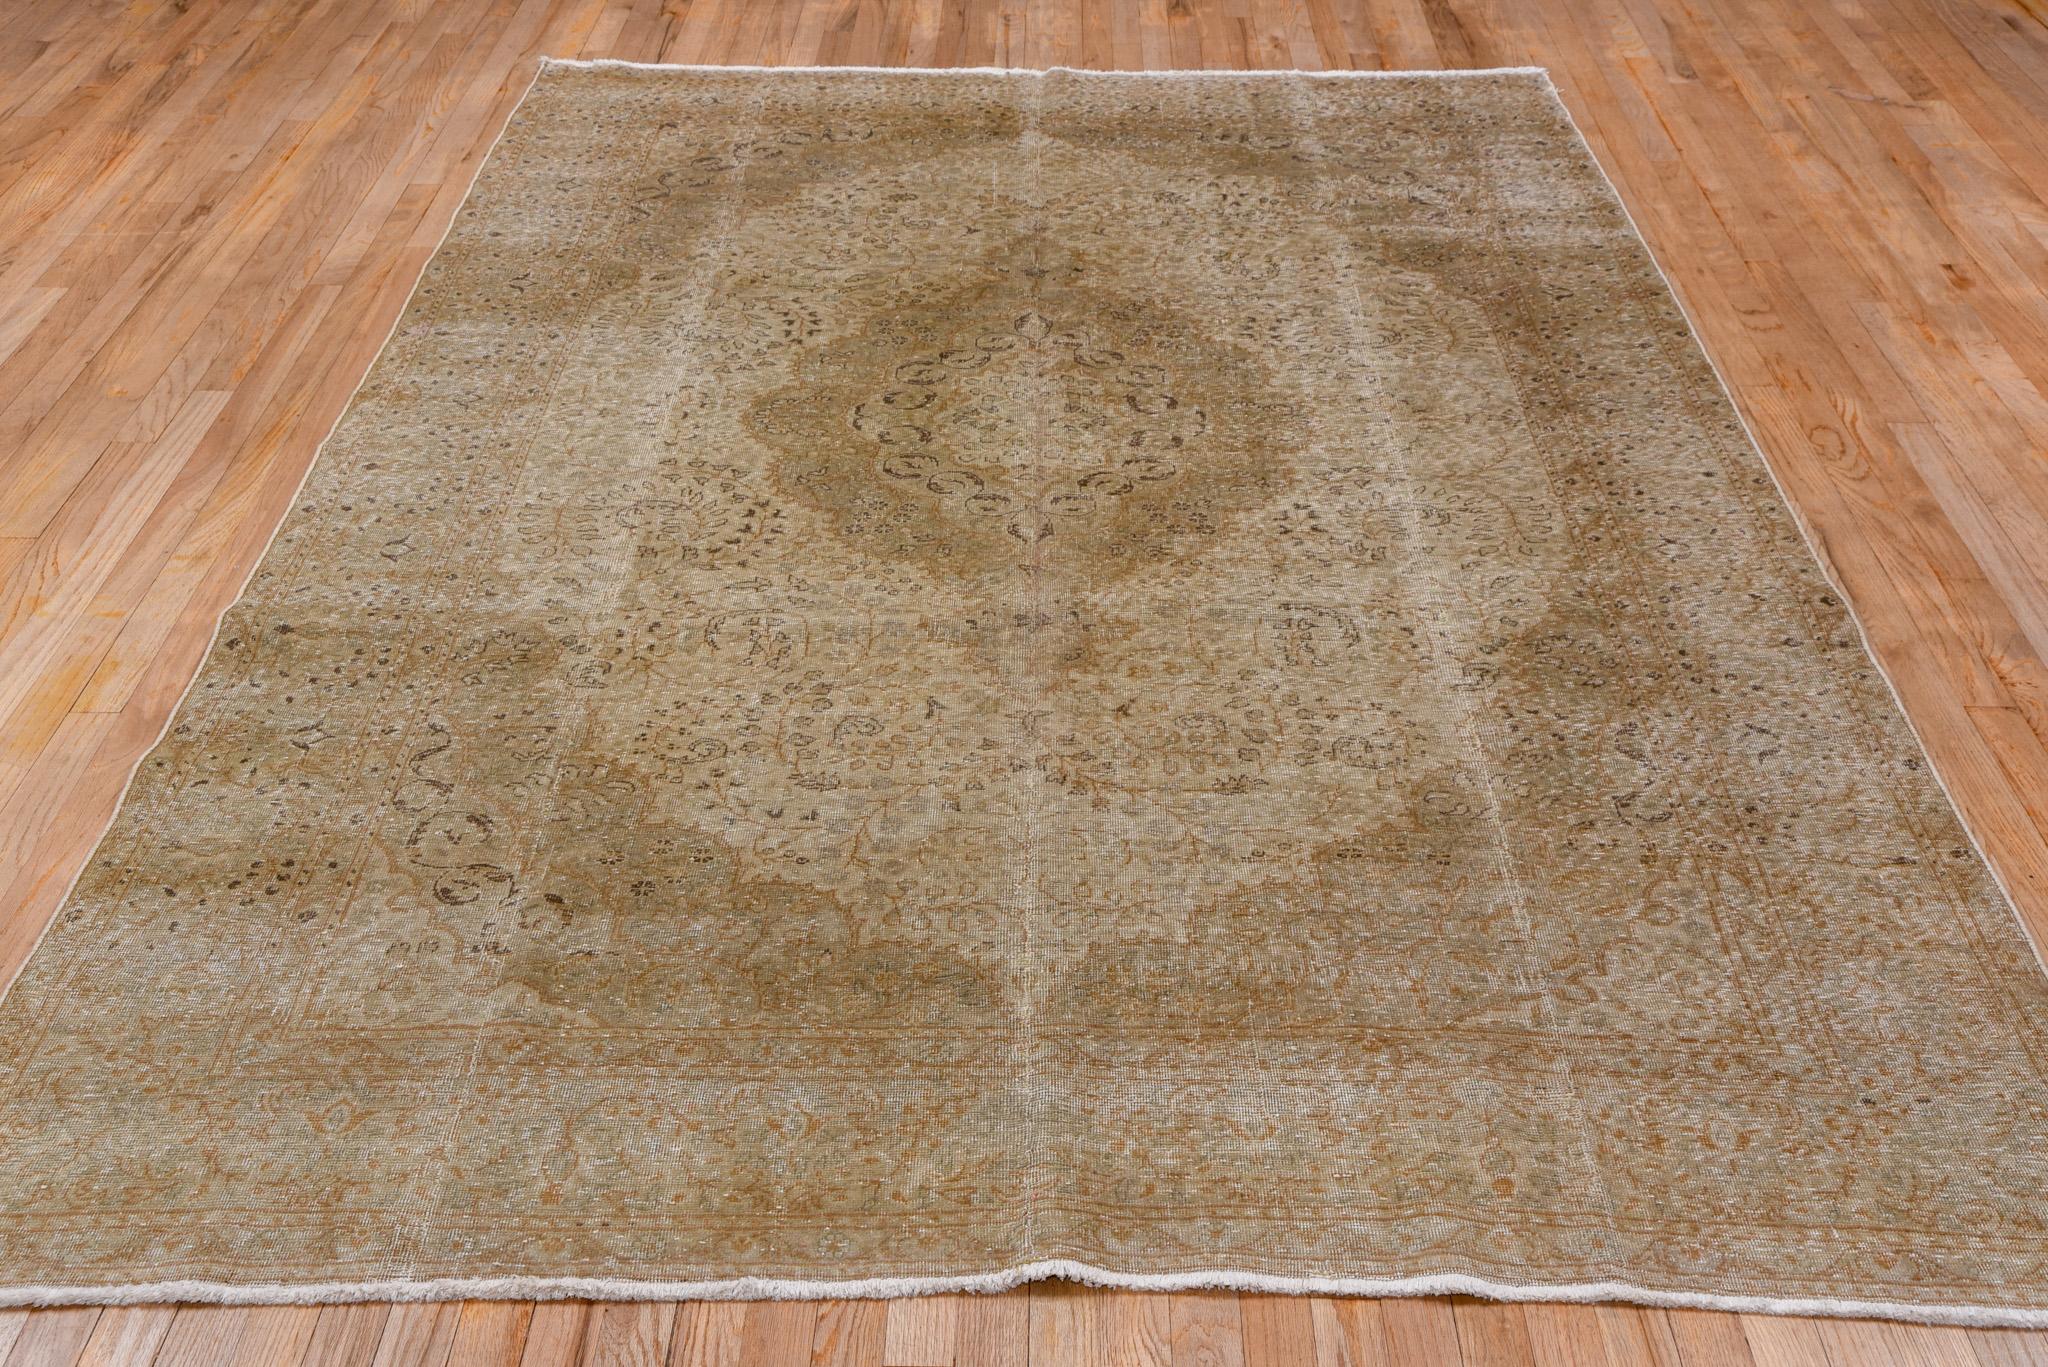 Antique Turkish Sivas rugs are a type of handwoven carpet that originate from the city of Sivas in Turkey. Sivas, located in central Anatolia, has a rich history of carpet weaving that dates back centuries. These rugs are highly regarded for their